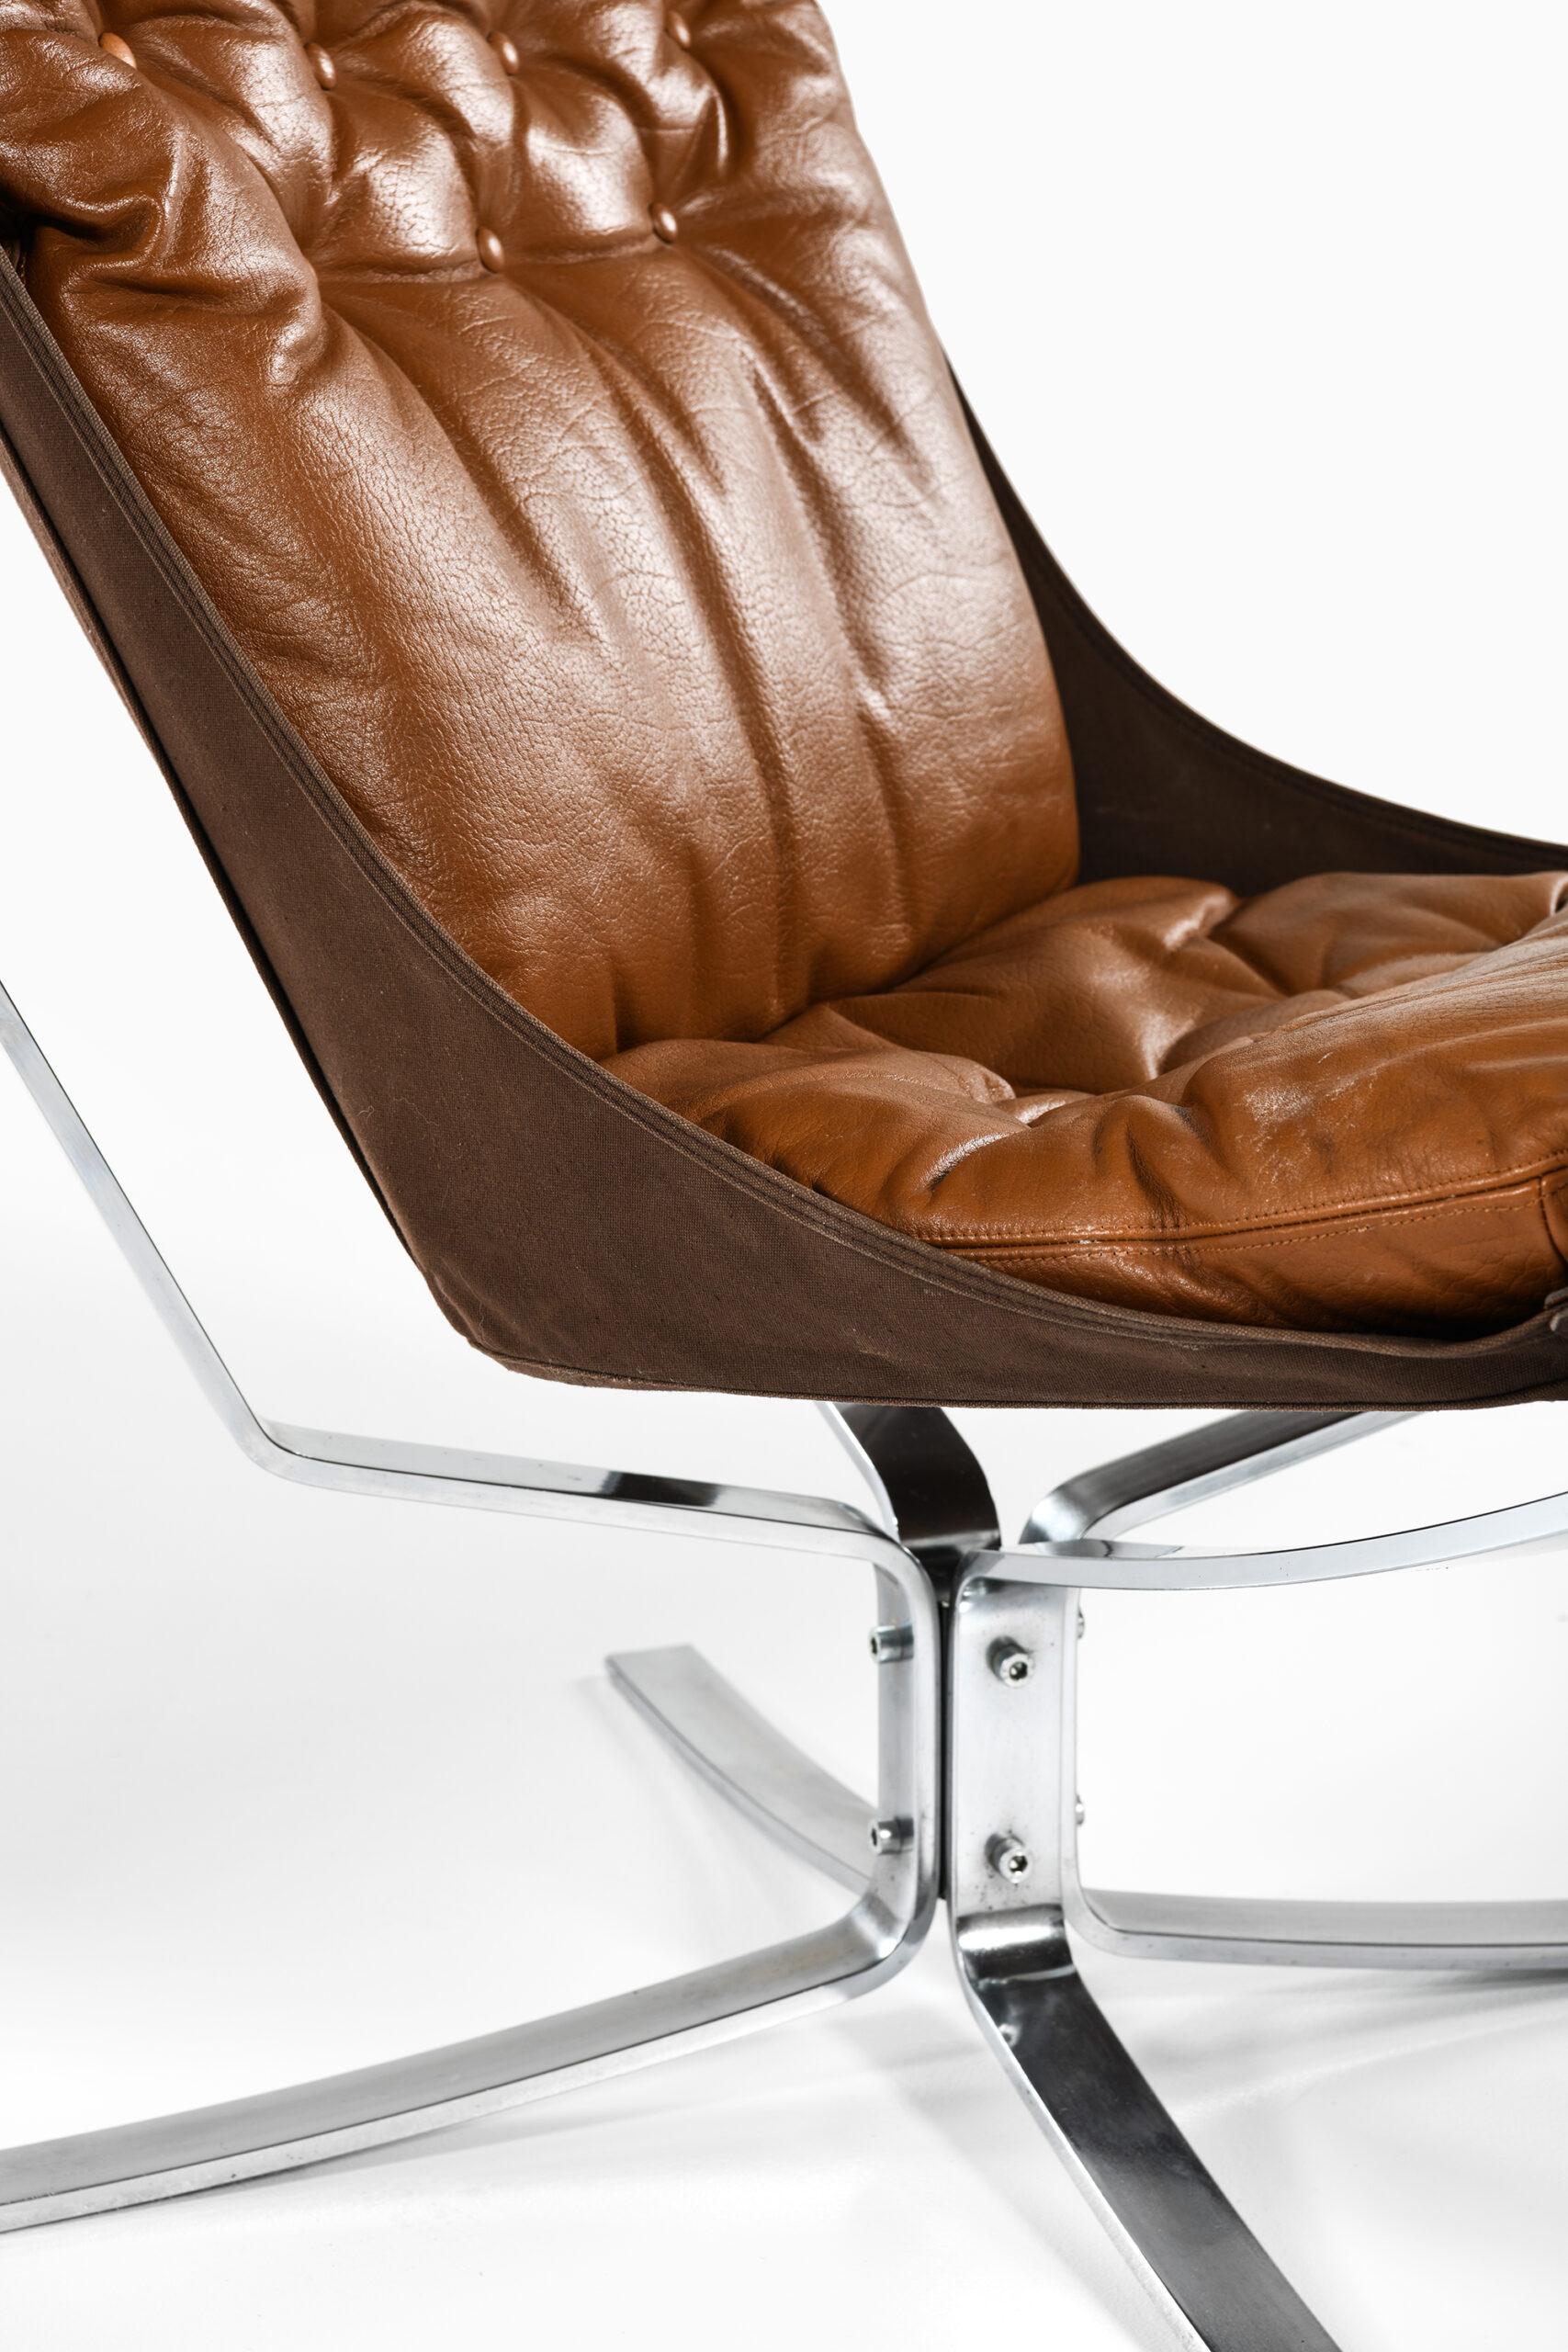 Sigurd Resell Seating Group Model Falcon Produced by Vatne Møbler in Norway For Sale 6